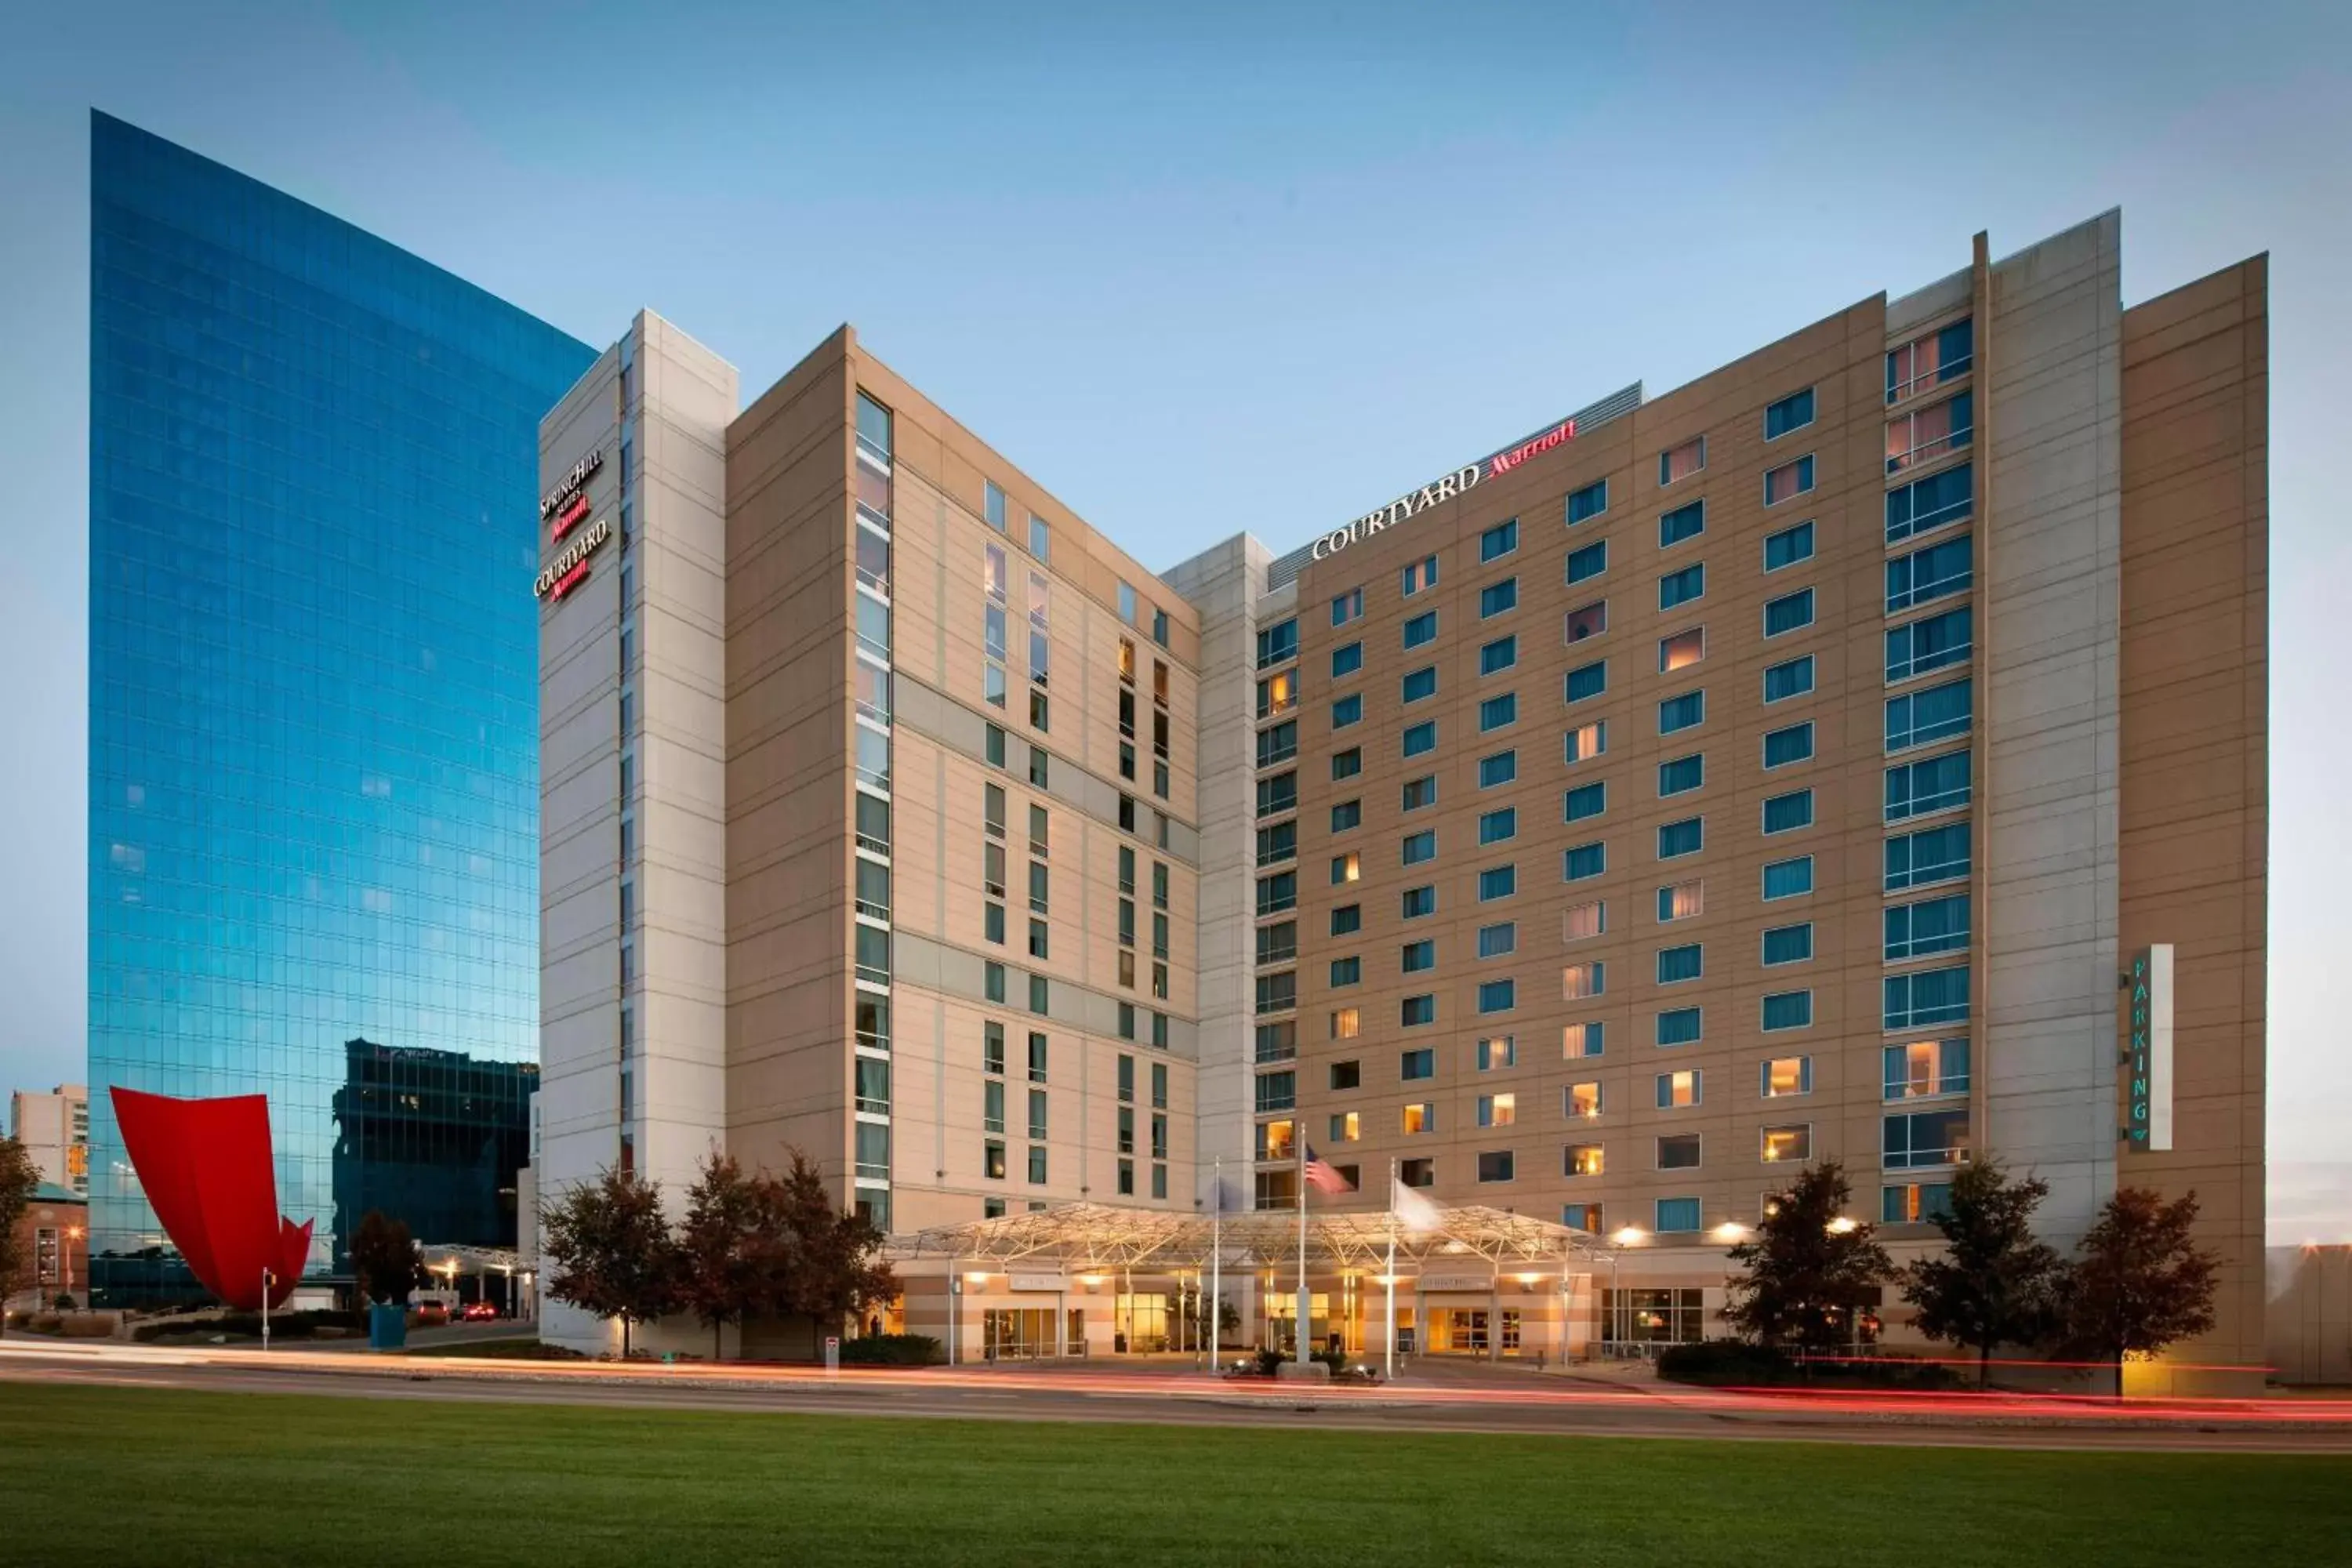 Property Building in SpringHill Suites Indianapolis Downtown